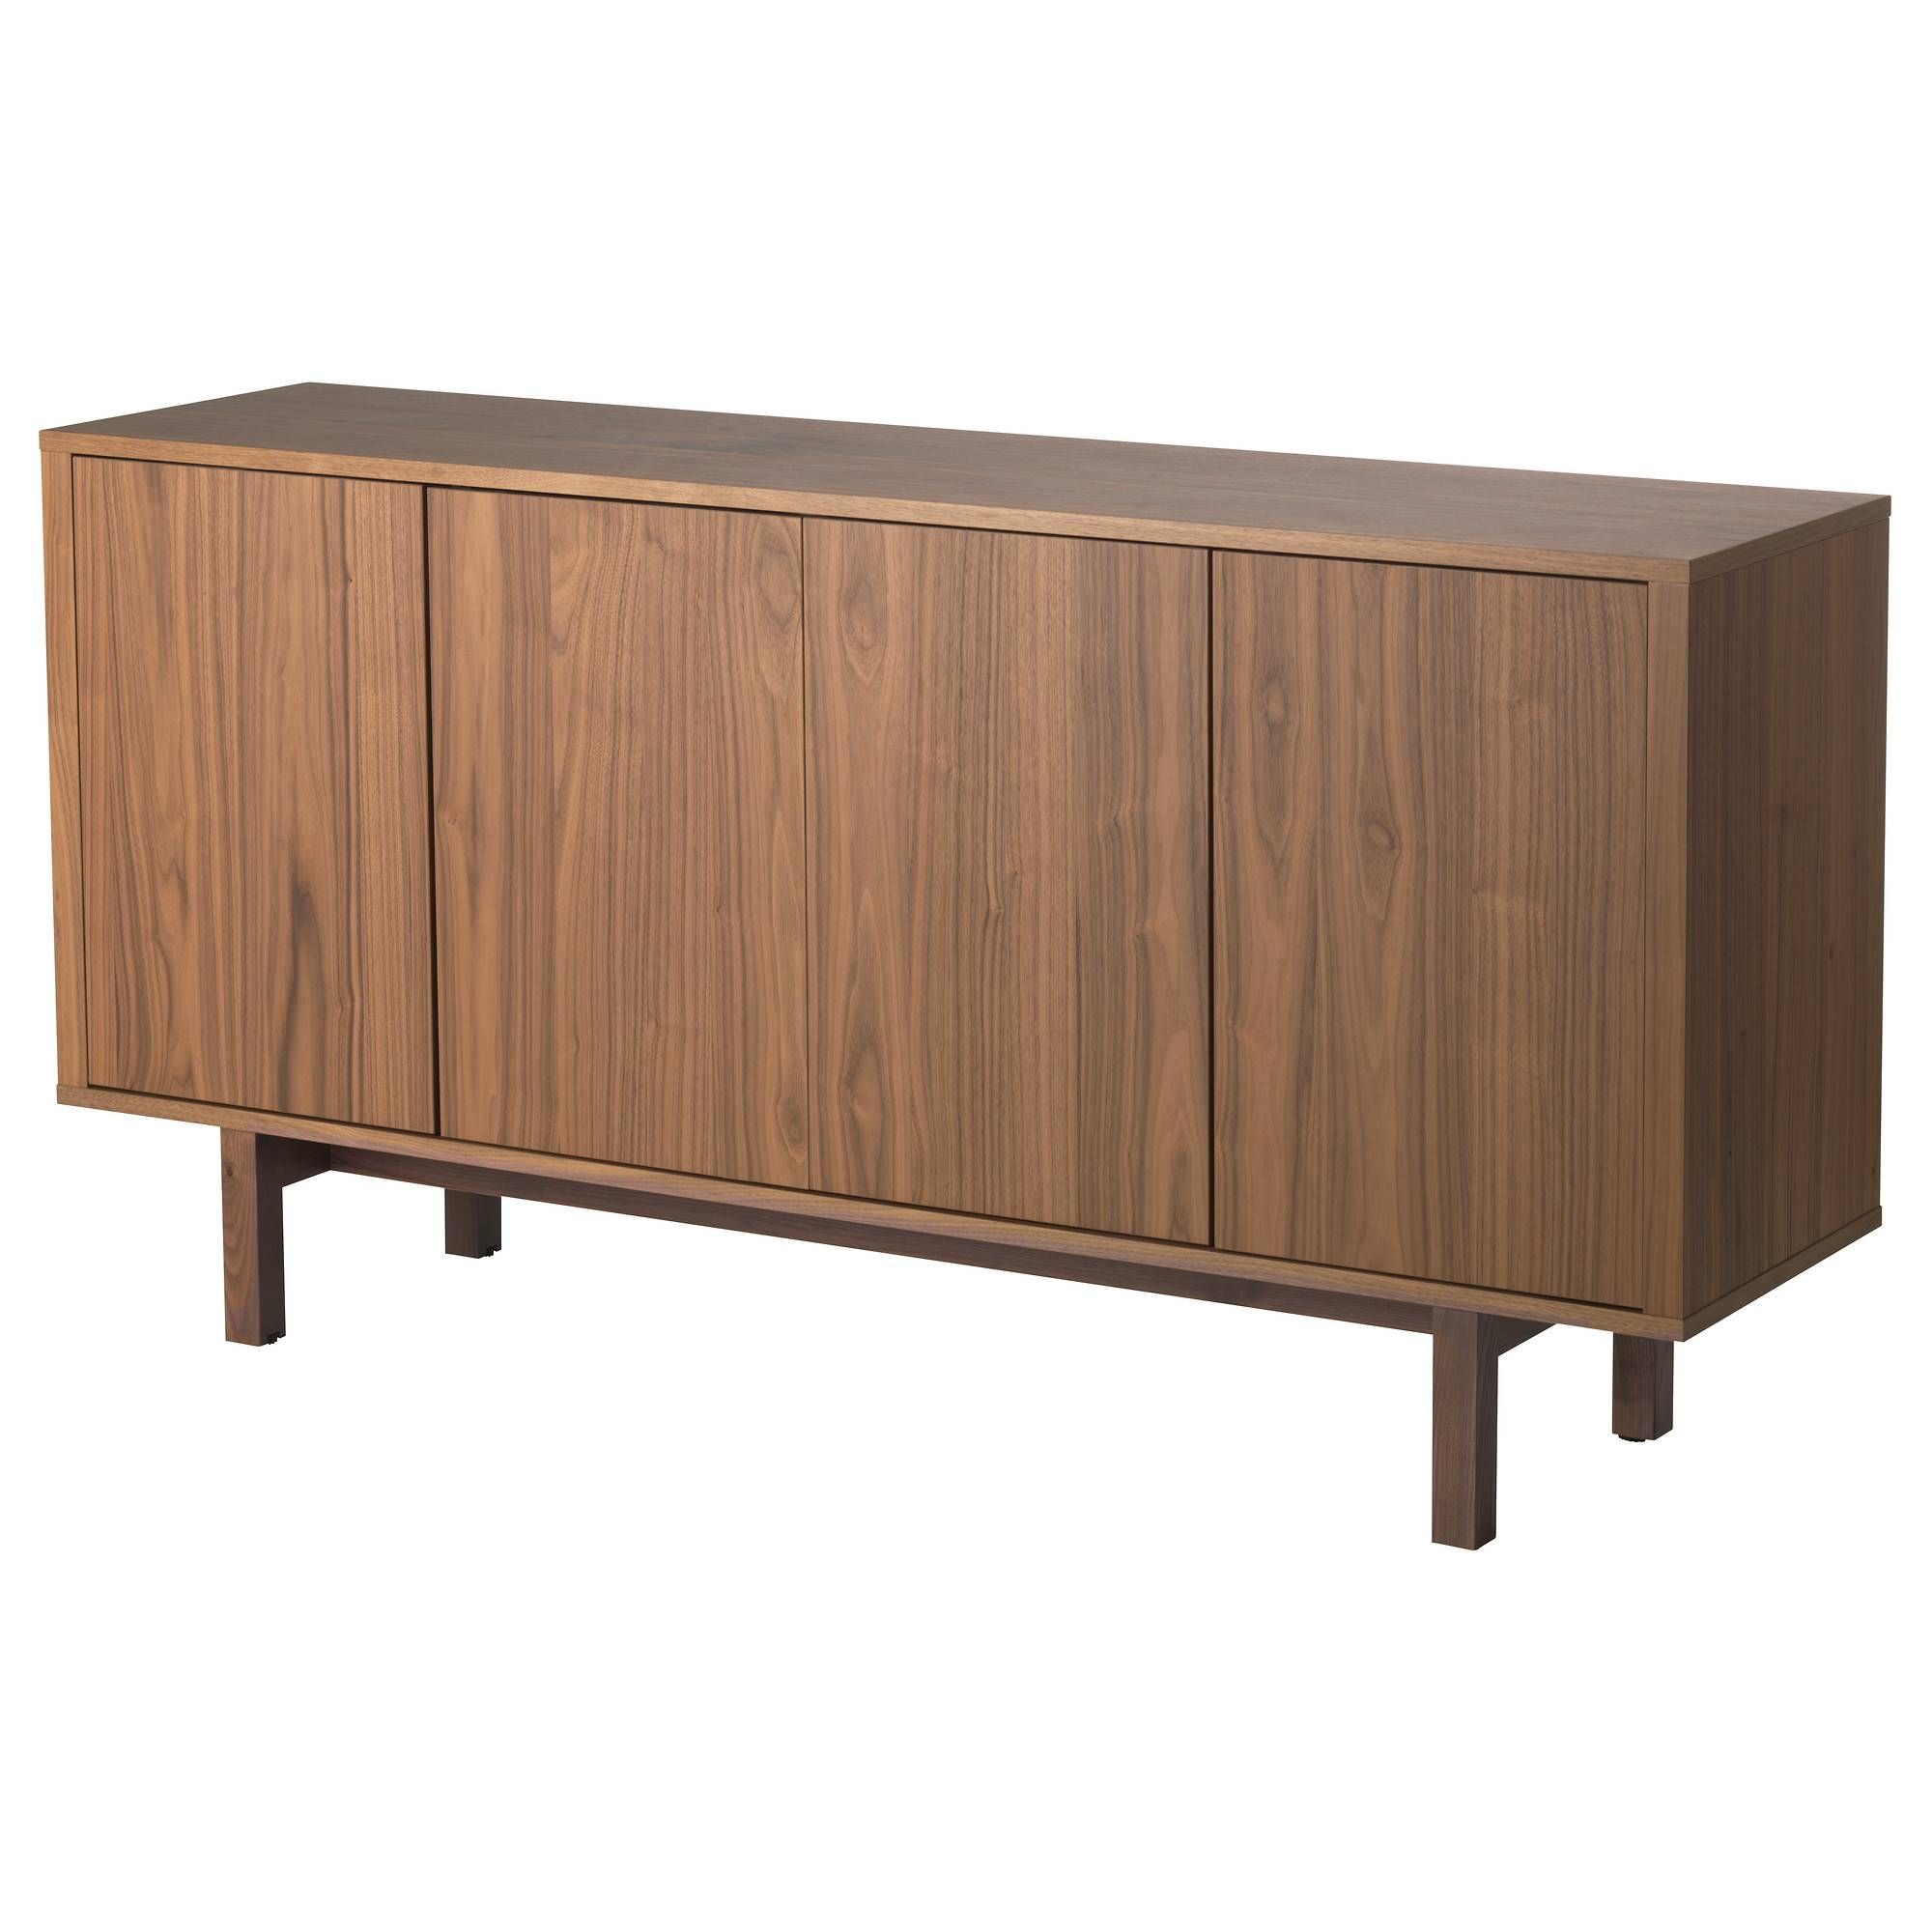 Stockholm Sideboard – Ikea Within Most Recently Released Ikea Sideboards (View 2 of 15)